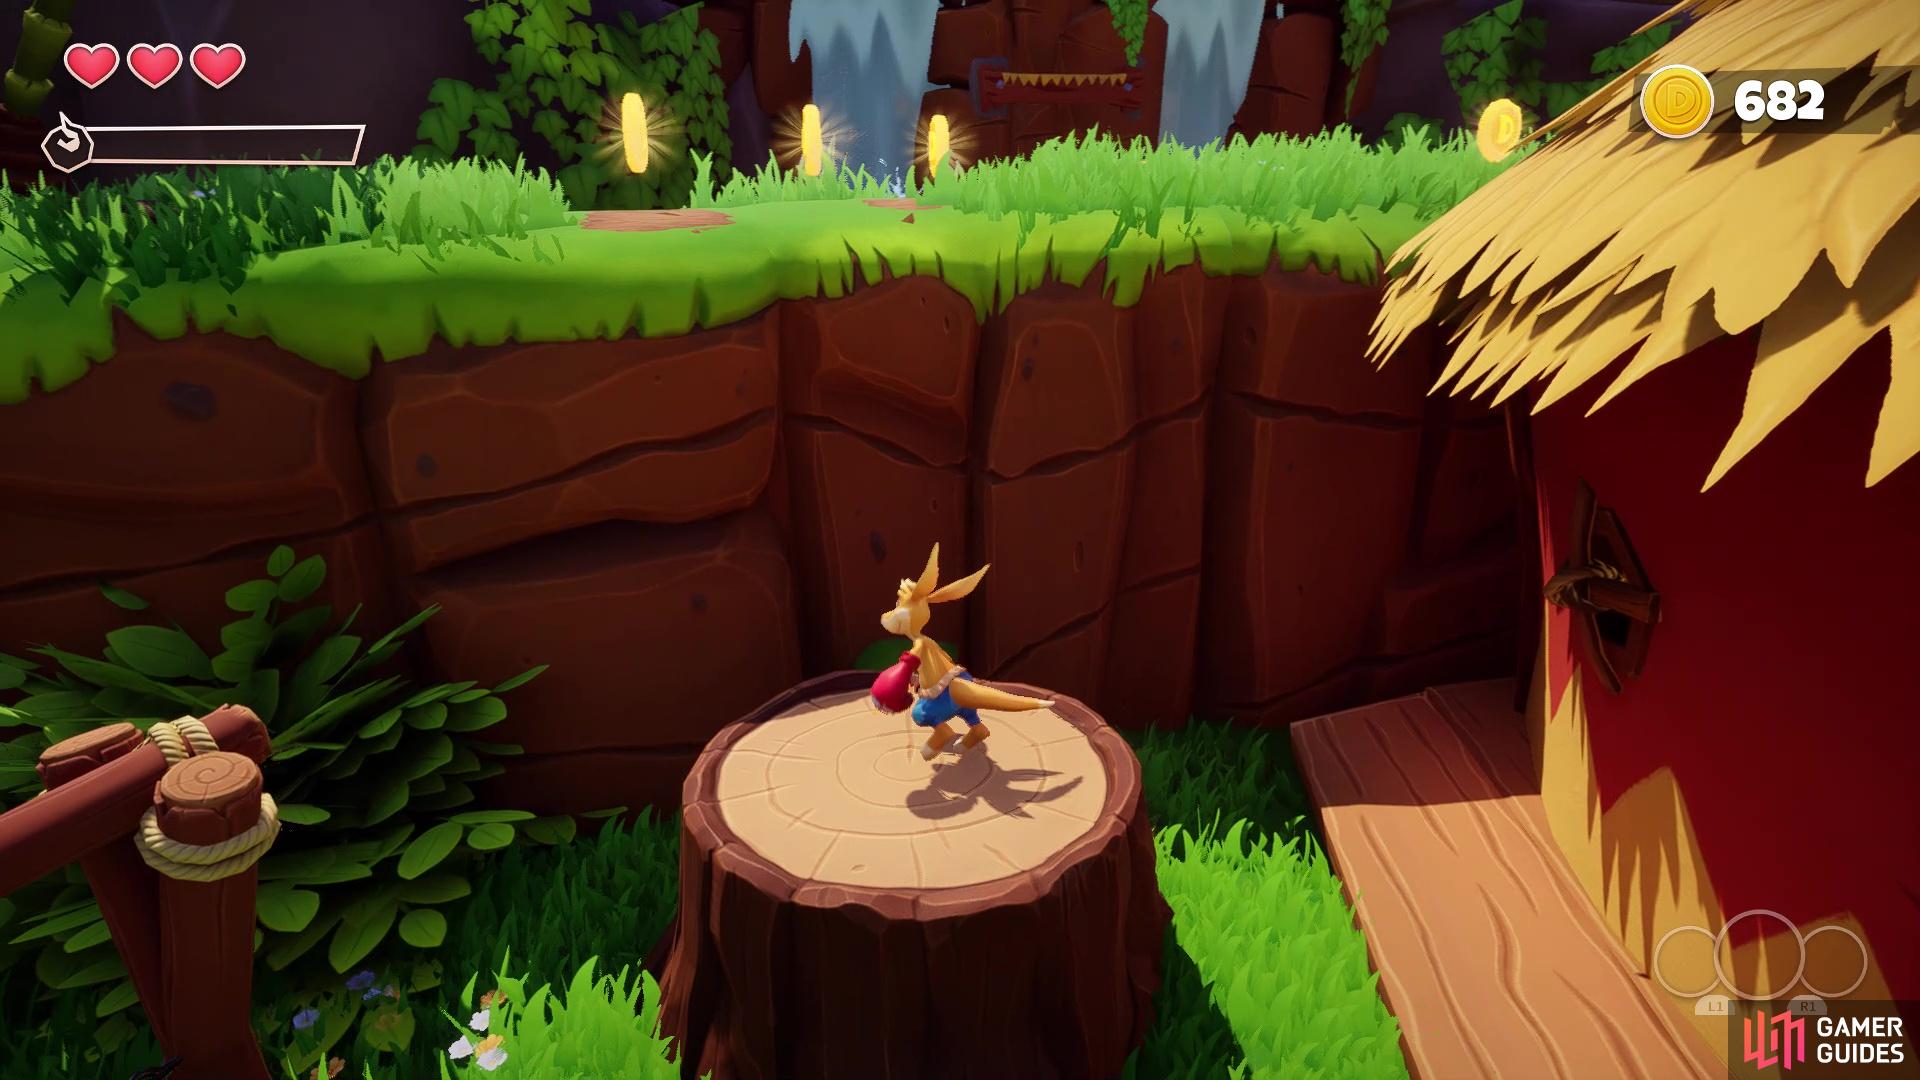 Double jump and tail spin to reach the ledge above this stump